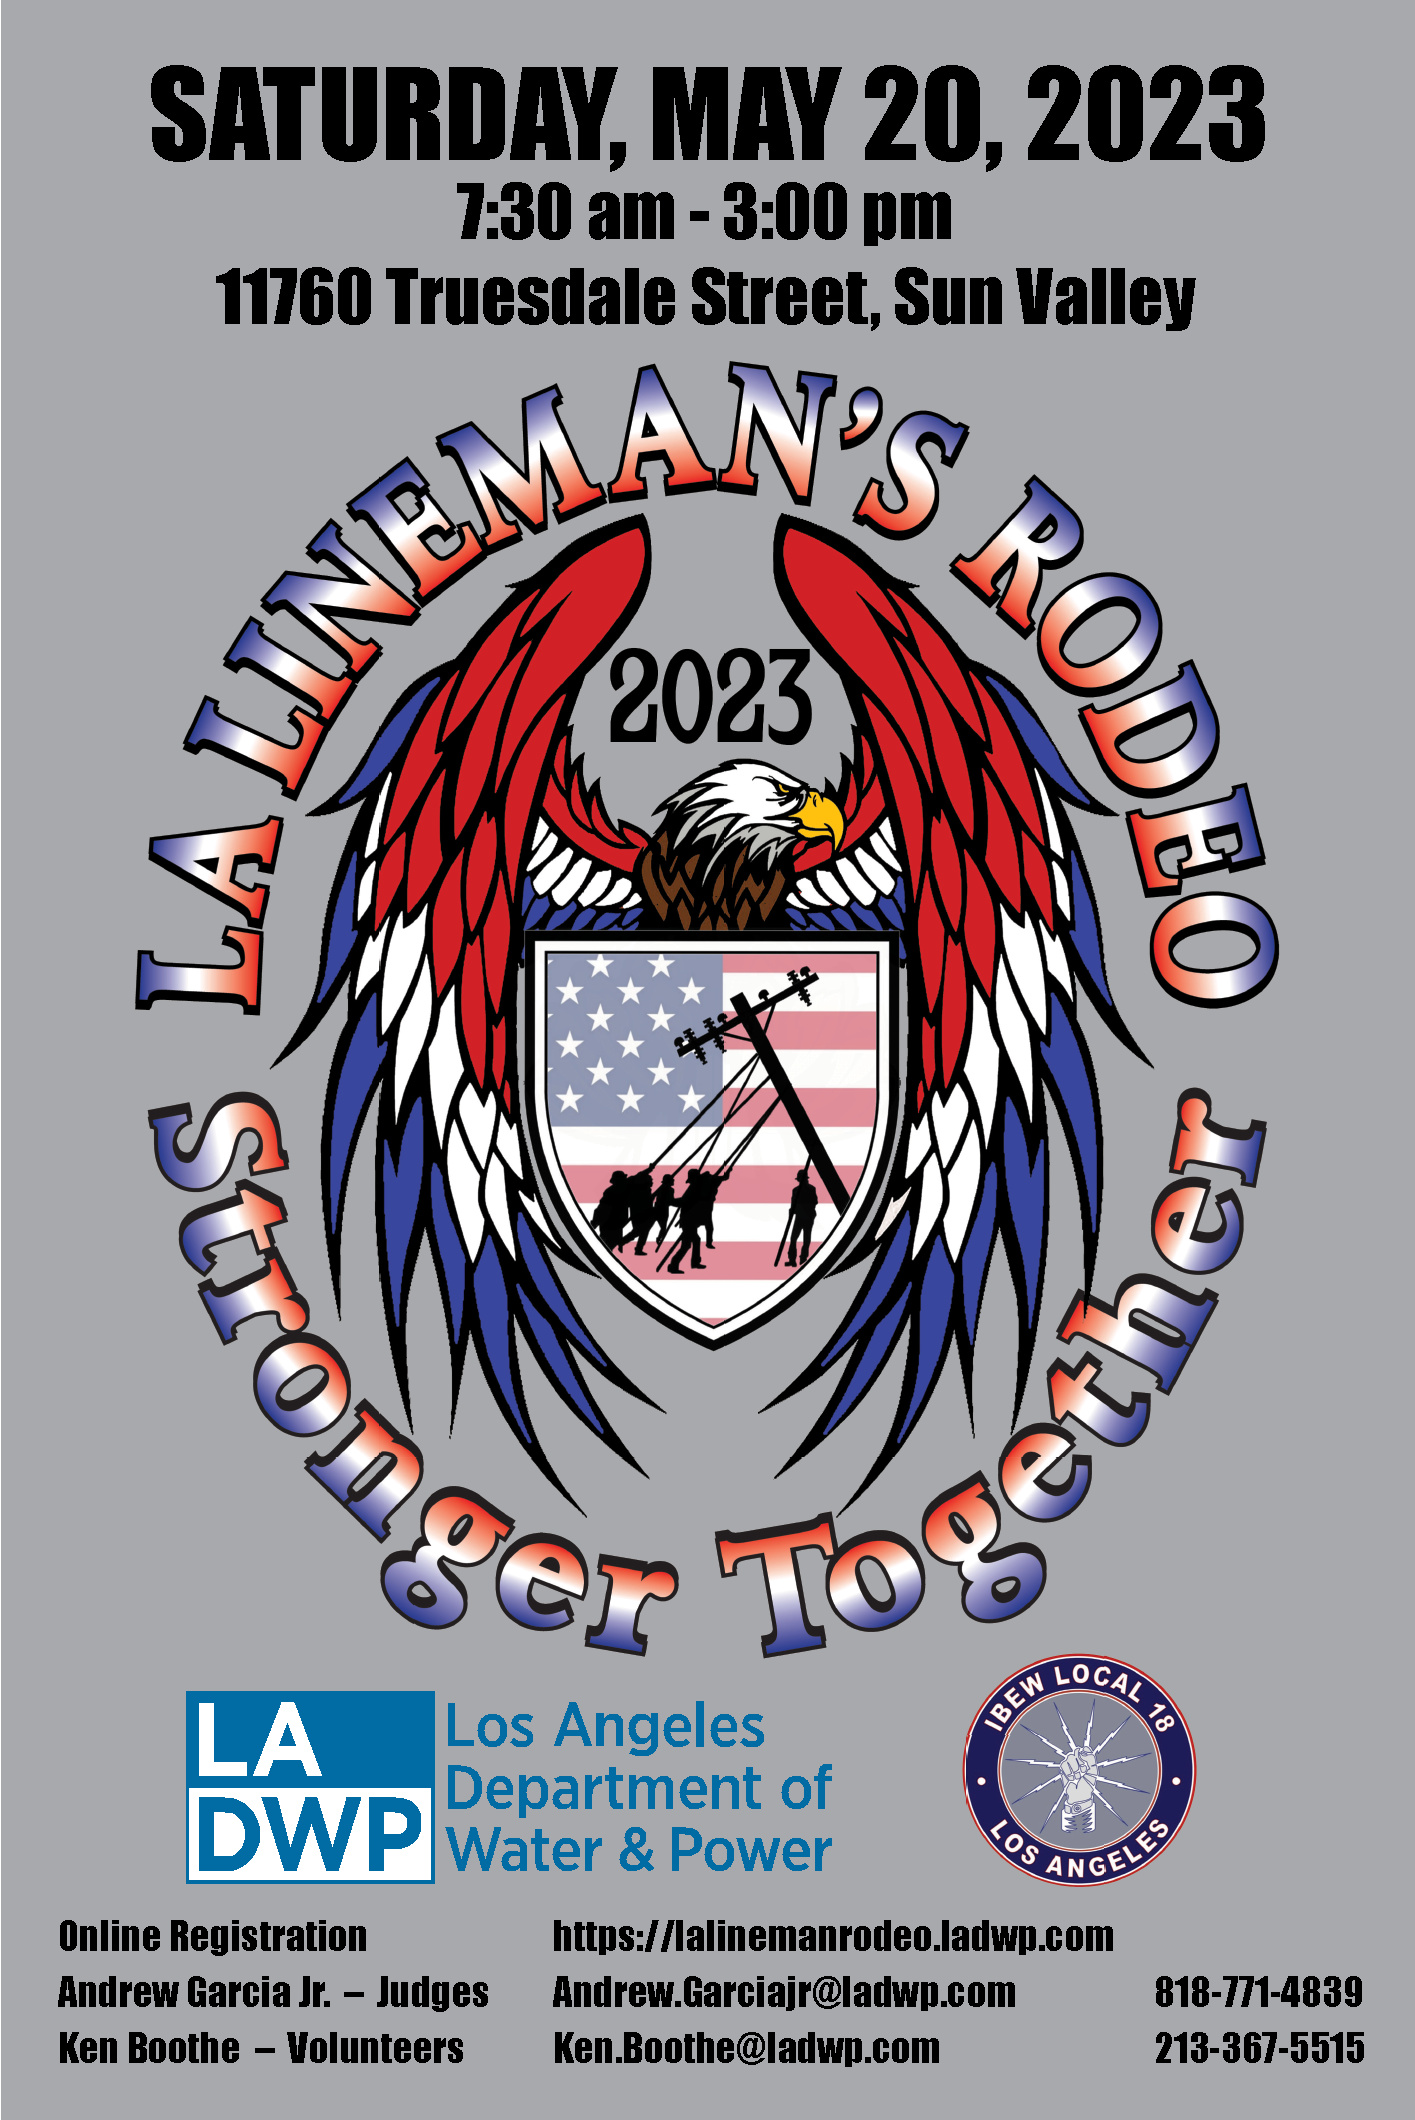 Saturday, May 20, 2023 7:30 am - 3:00 pm 11760 Truesdale Street, Sun Valley LA Lineman's Rodeo 2023 Stronger Together Los Angeles Department of Water and Power IBEW Local 18 Los Angeles Online Registration https://lalinemanrodeo.ladwp.com Andrew Garcia, Jr. Judges AndrewGarciajr@ladwp.com 818-771-4839 Ken Boothe Volunteers Ken.Boothe@ladwp.com 213-367-5515